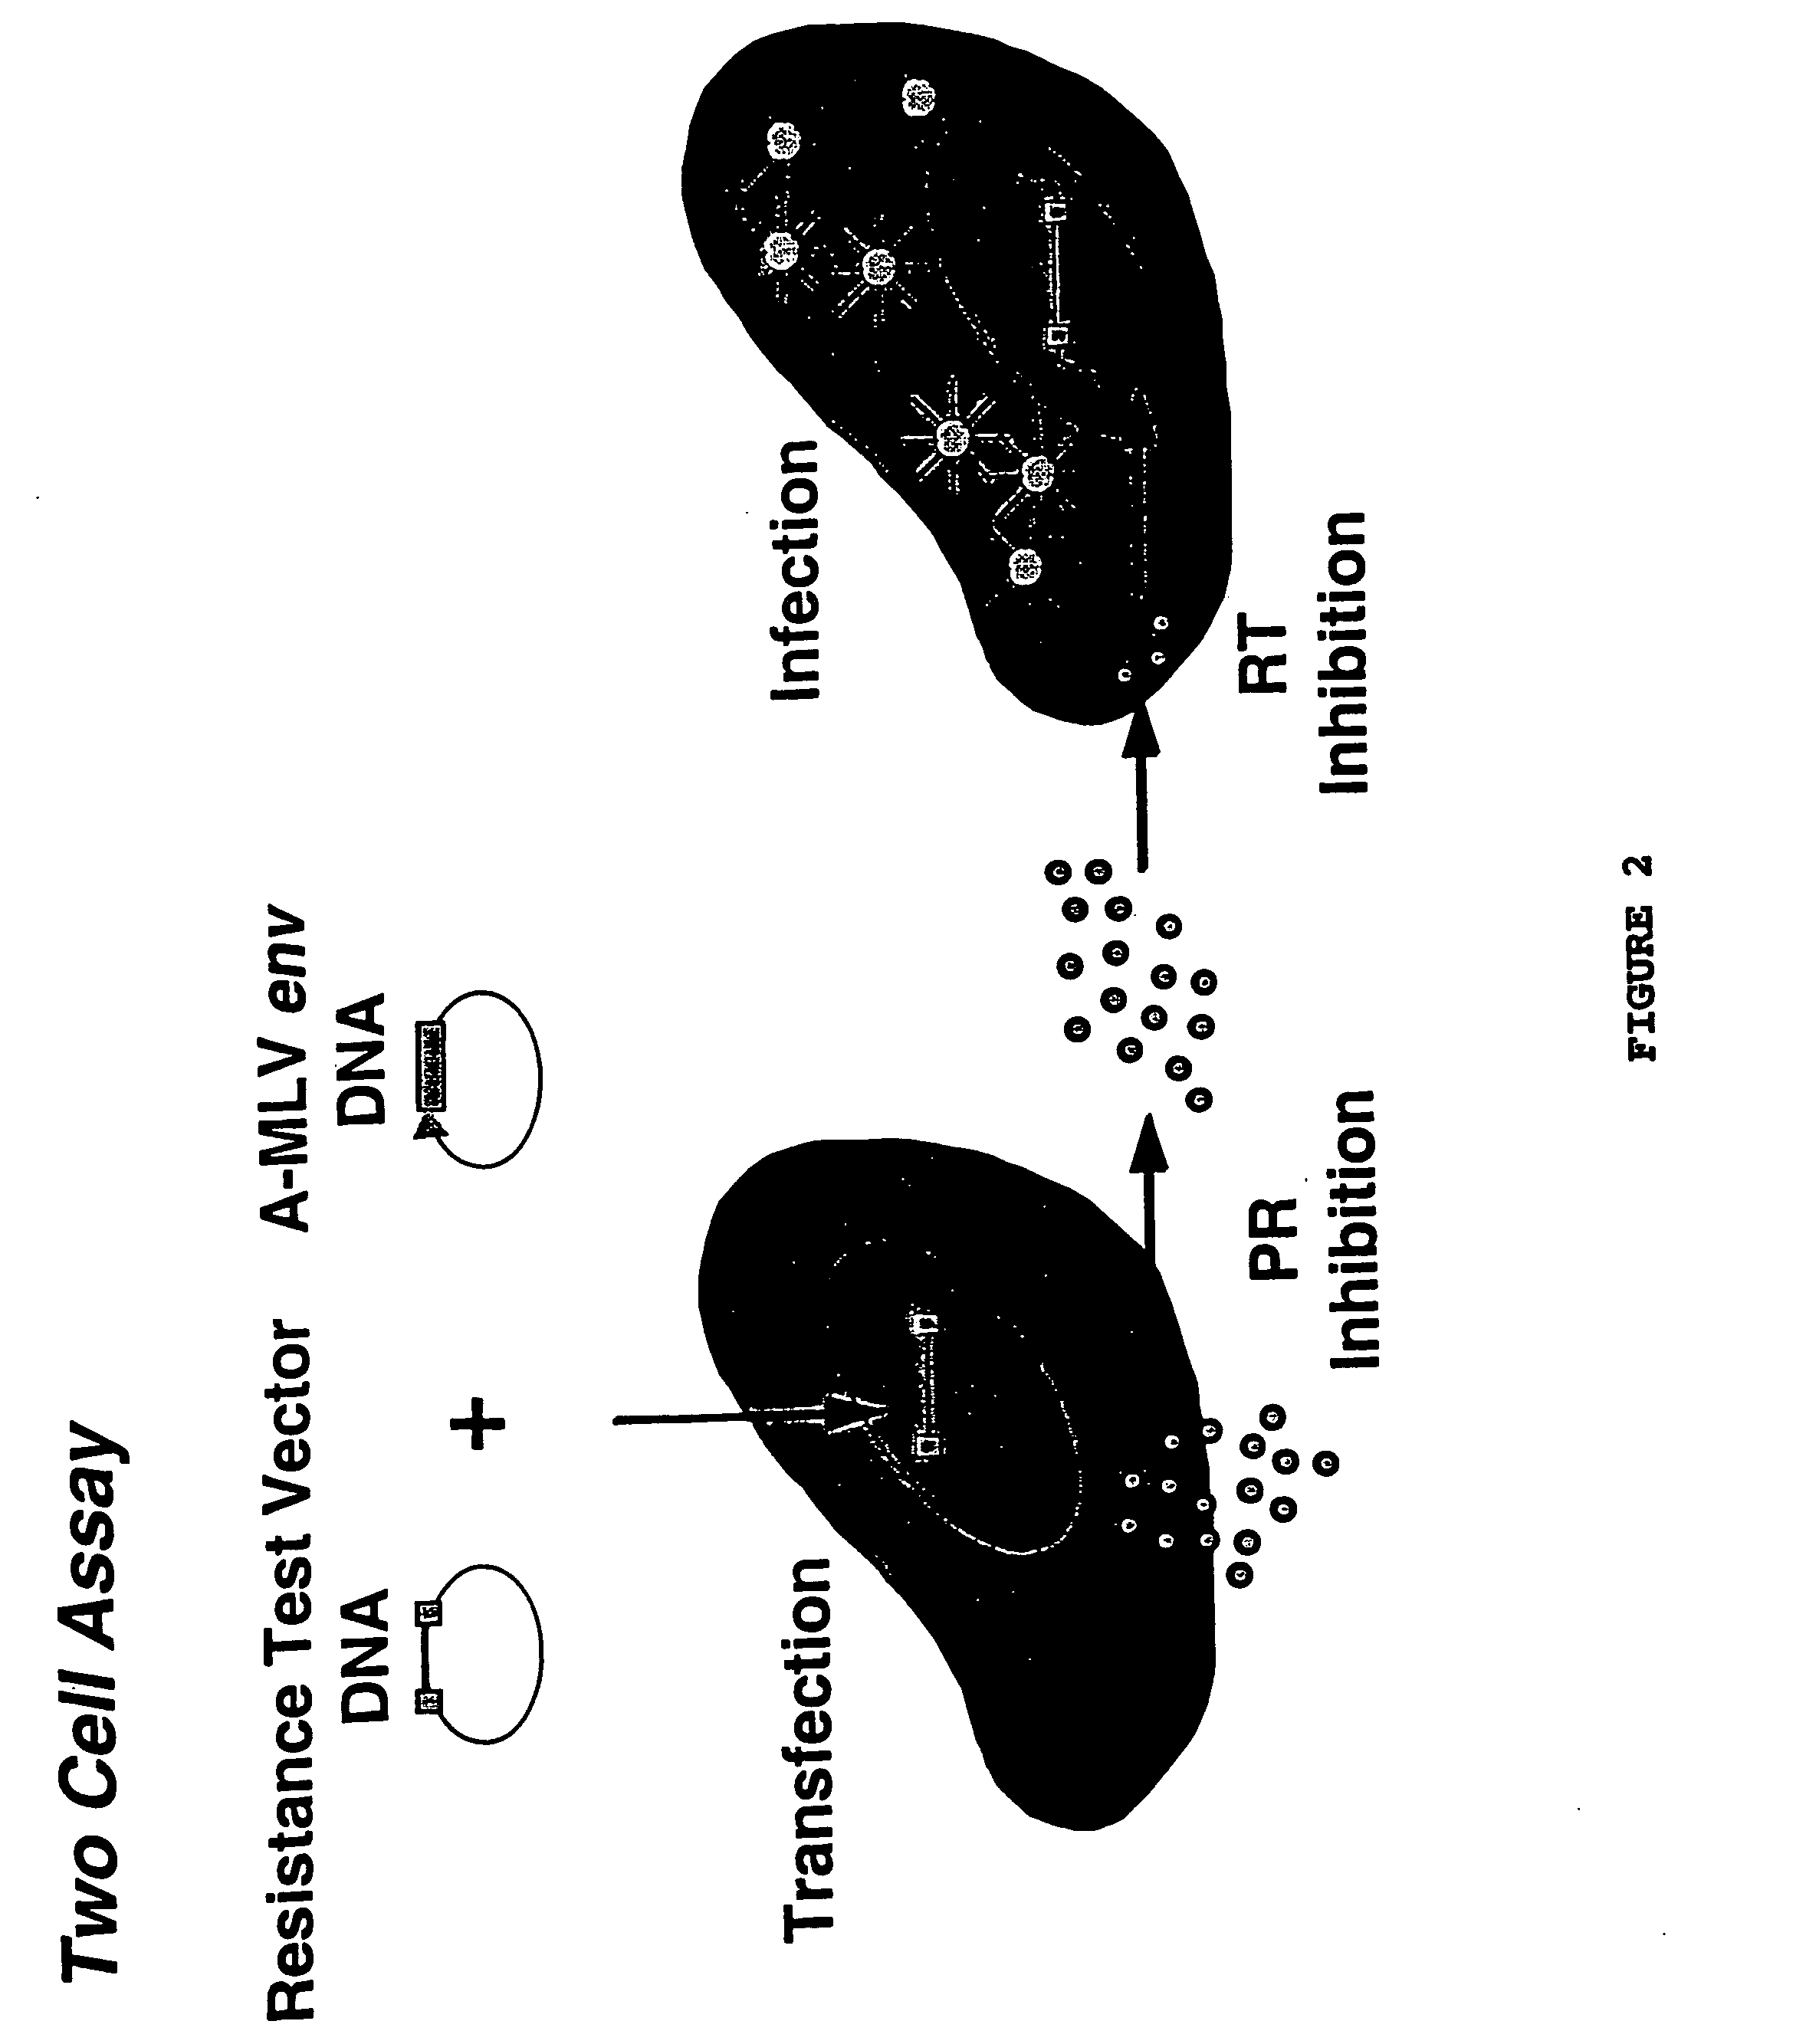 Means and methods for monitoring non-nucleoside reverse transcriptase inhibitor antiretroviral therapy and guiding therapeutic decisions in the treatment HIV-AIDS